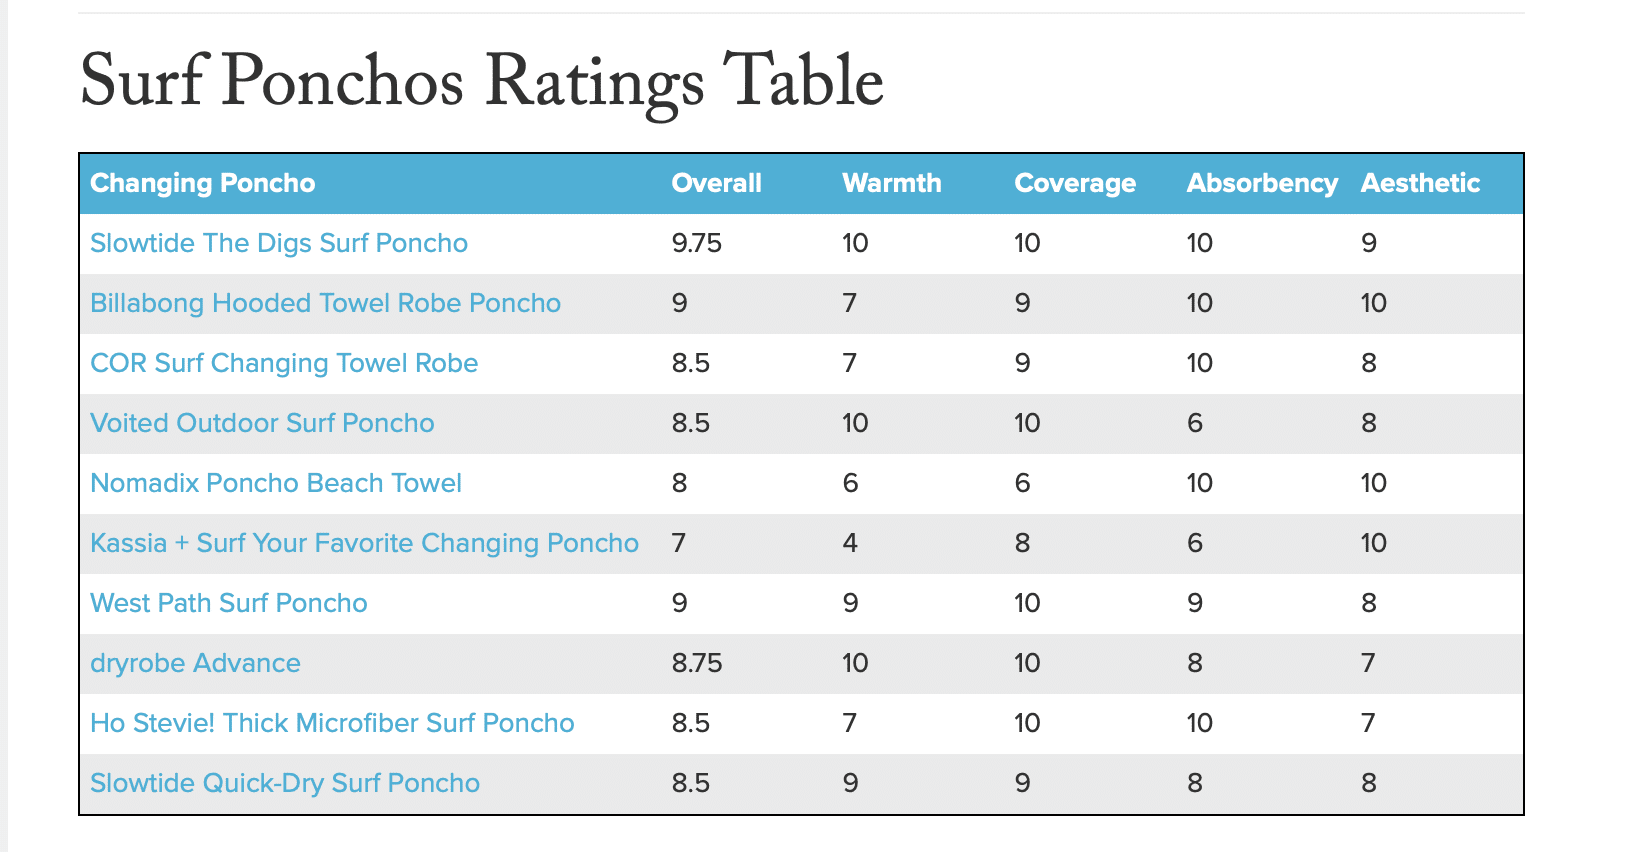 Surf poncho ratings by The Inertia